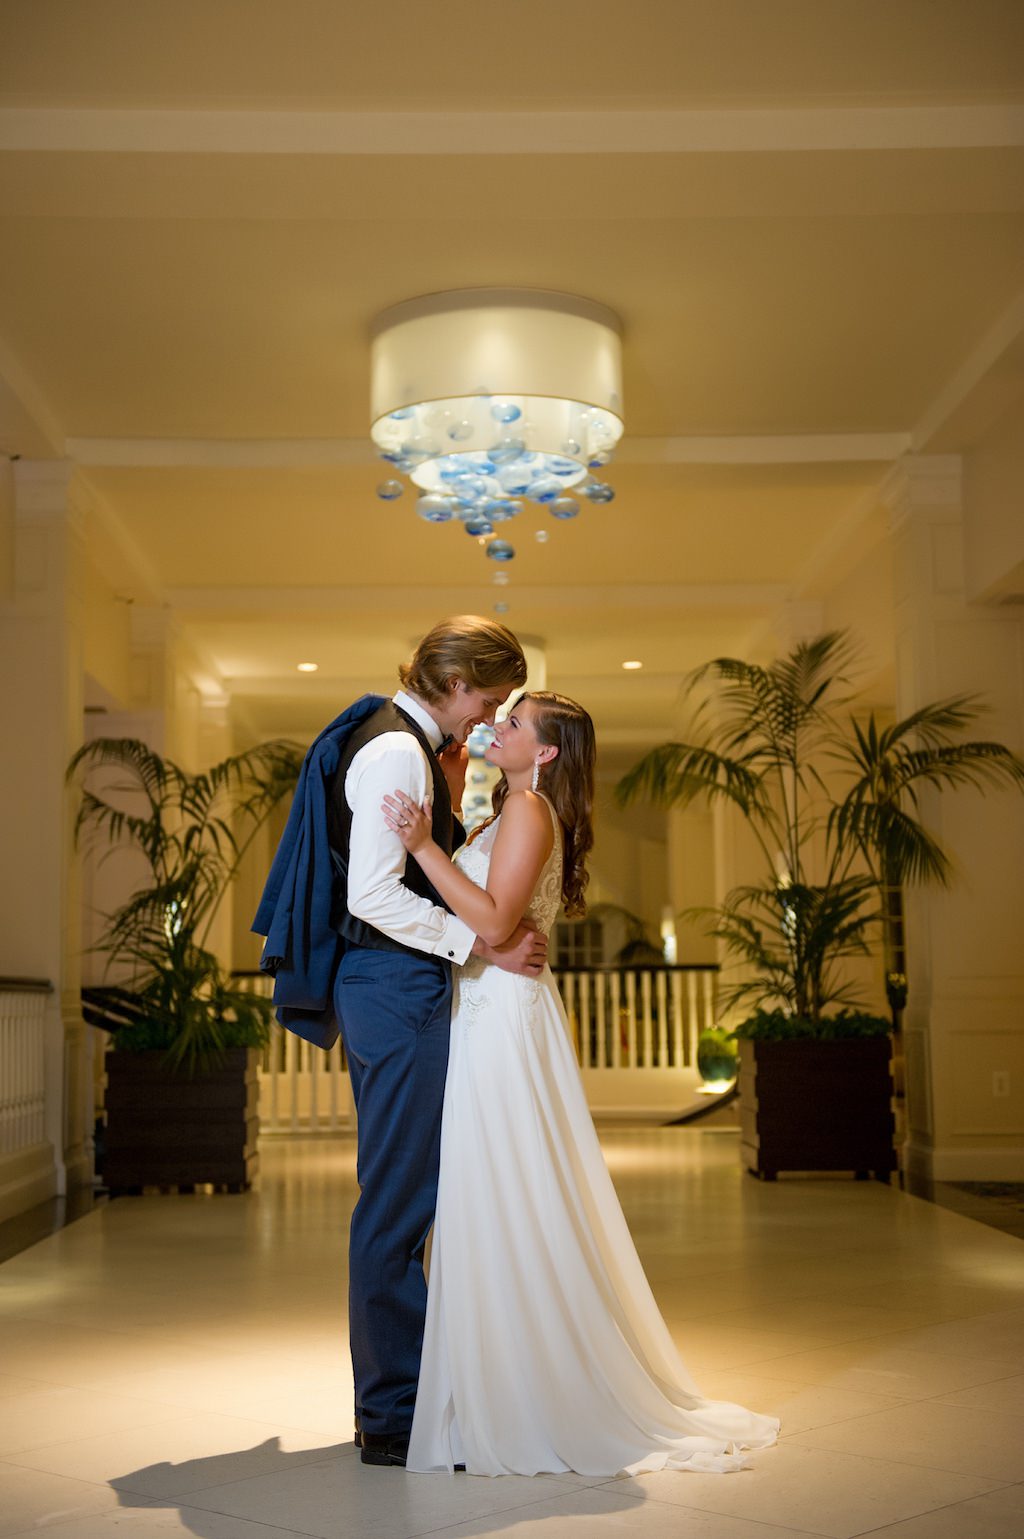 Tampa Bay Bride and Groom Wedding Portrait in Chic Hotel Lobby, Bride in Streamline Flowy Reception Gown | Tampa Wedding Dress Shop Truly Forever Bridal | Tampa Bay Wedding Photographer Andi Diamond Photography